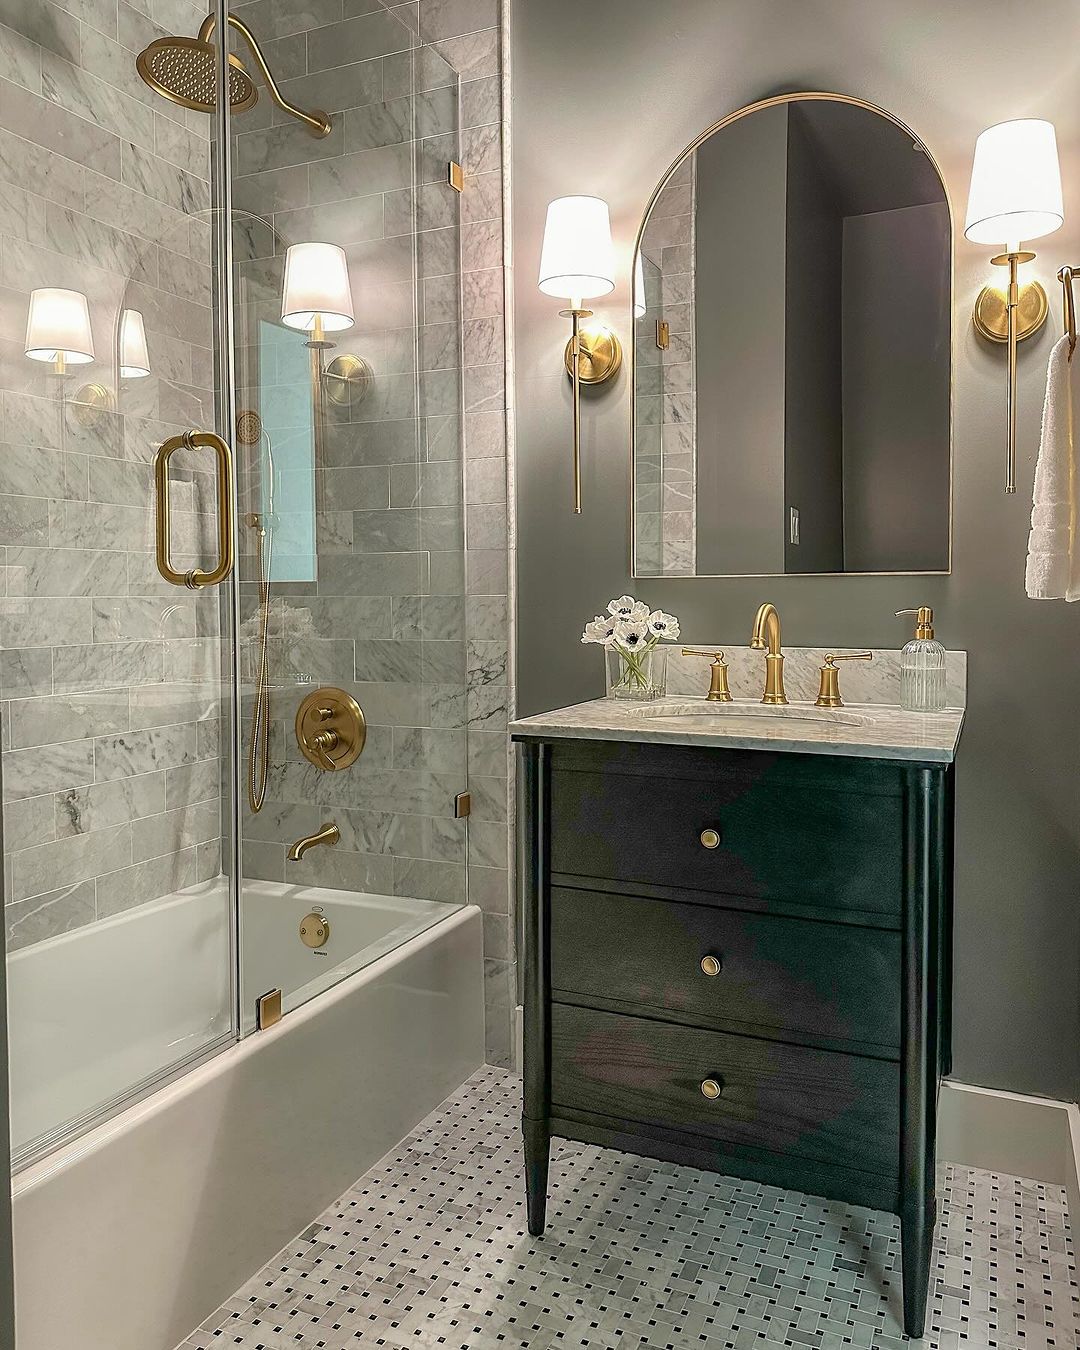 Luxurious Marble and Brass Accents in a Small Bathroom